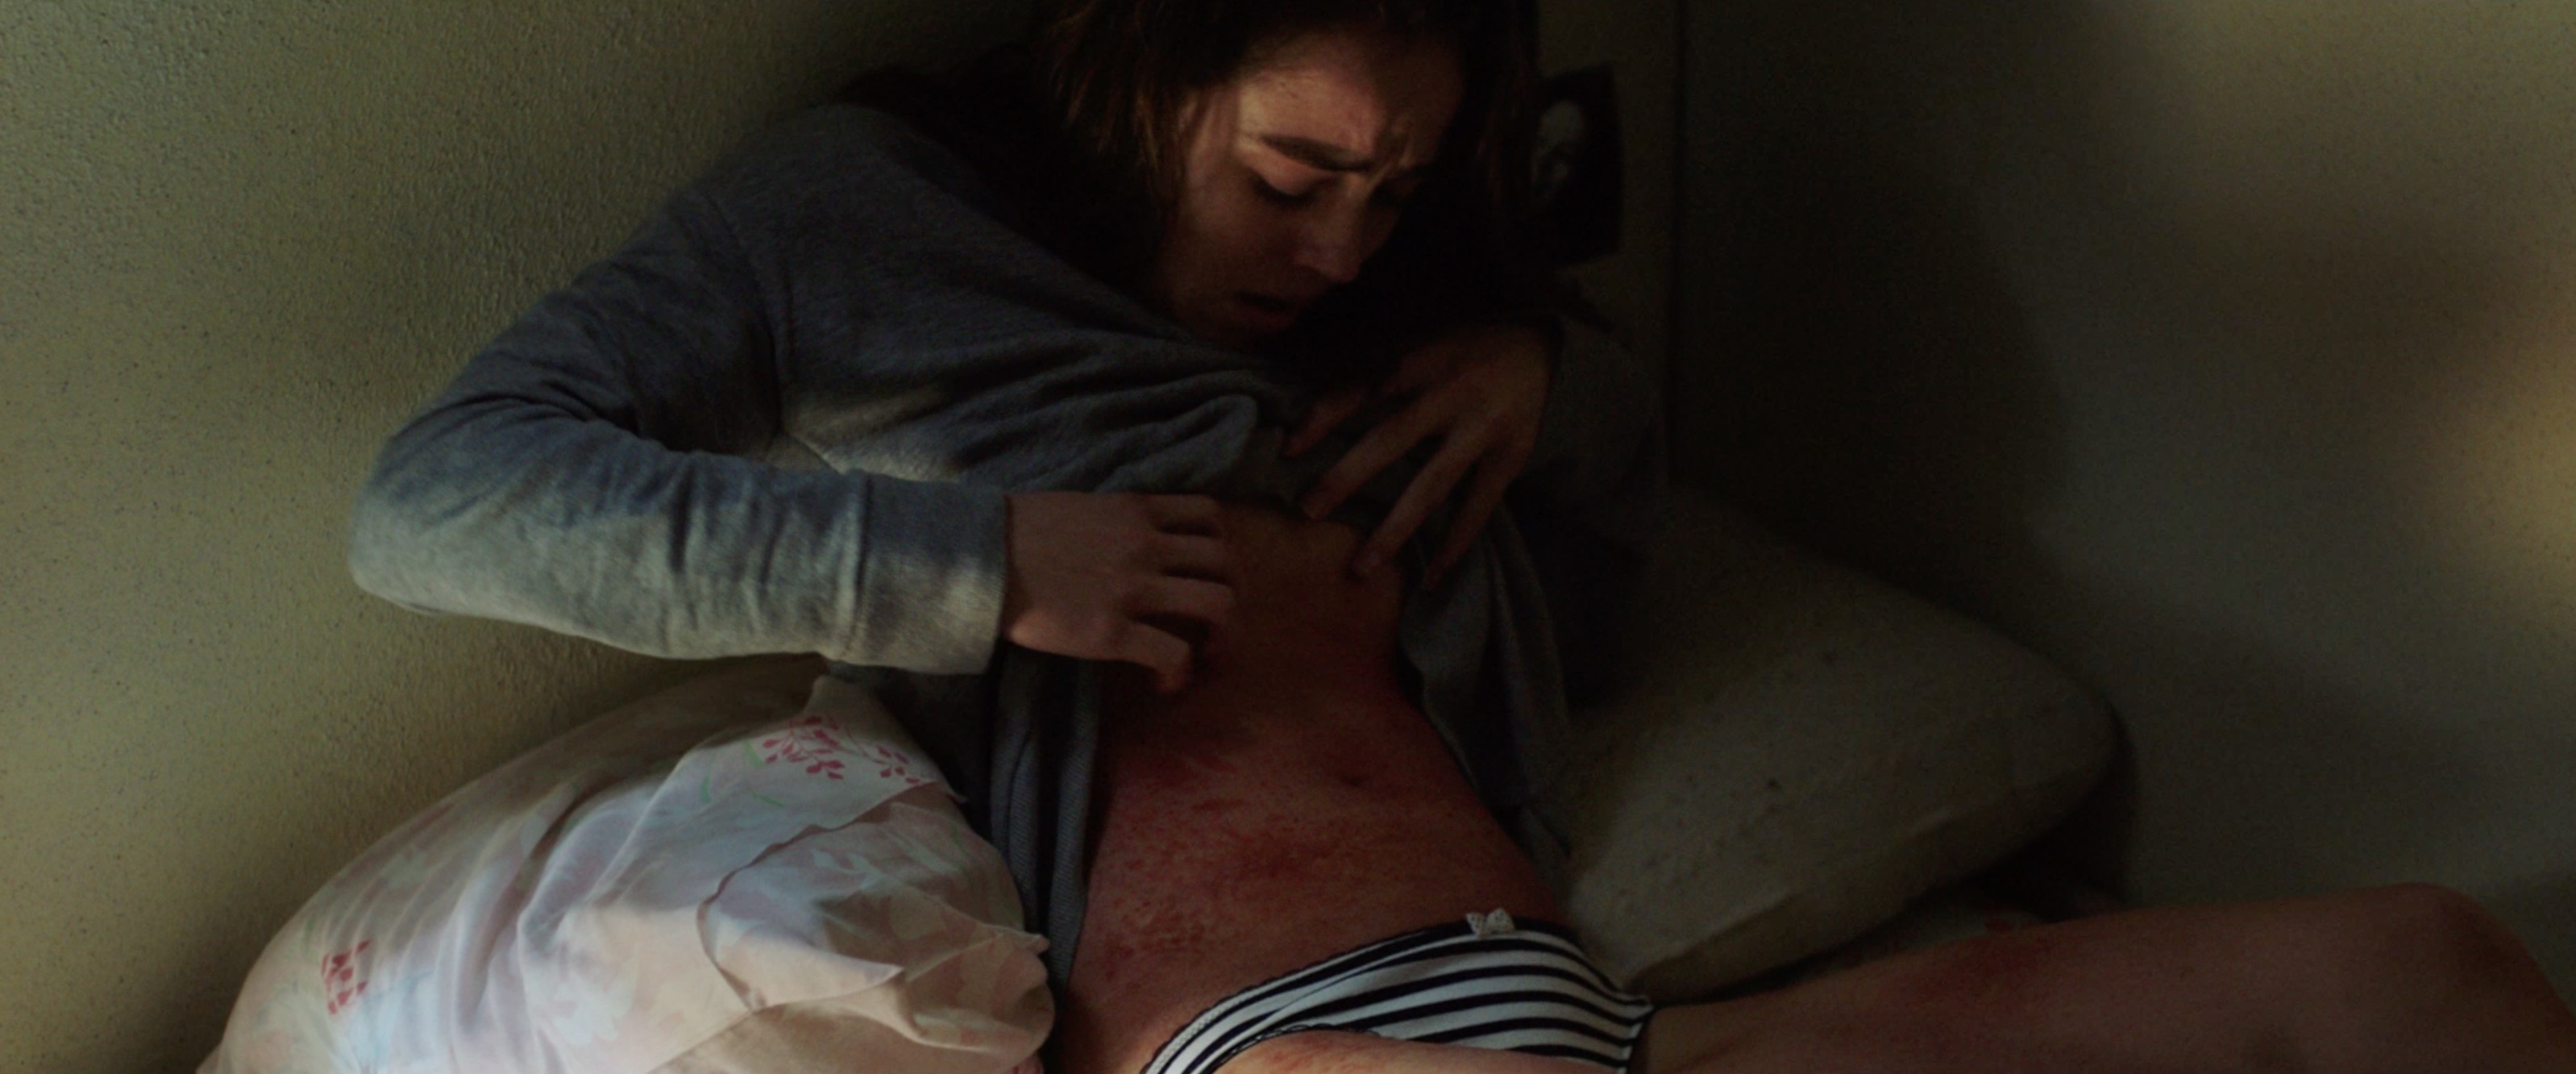 This 'Raw' Clip Leaves a Nasty Rash (Exclusive) - Bloody Disgusting